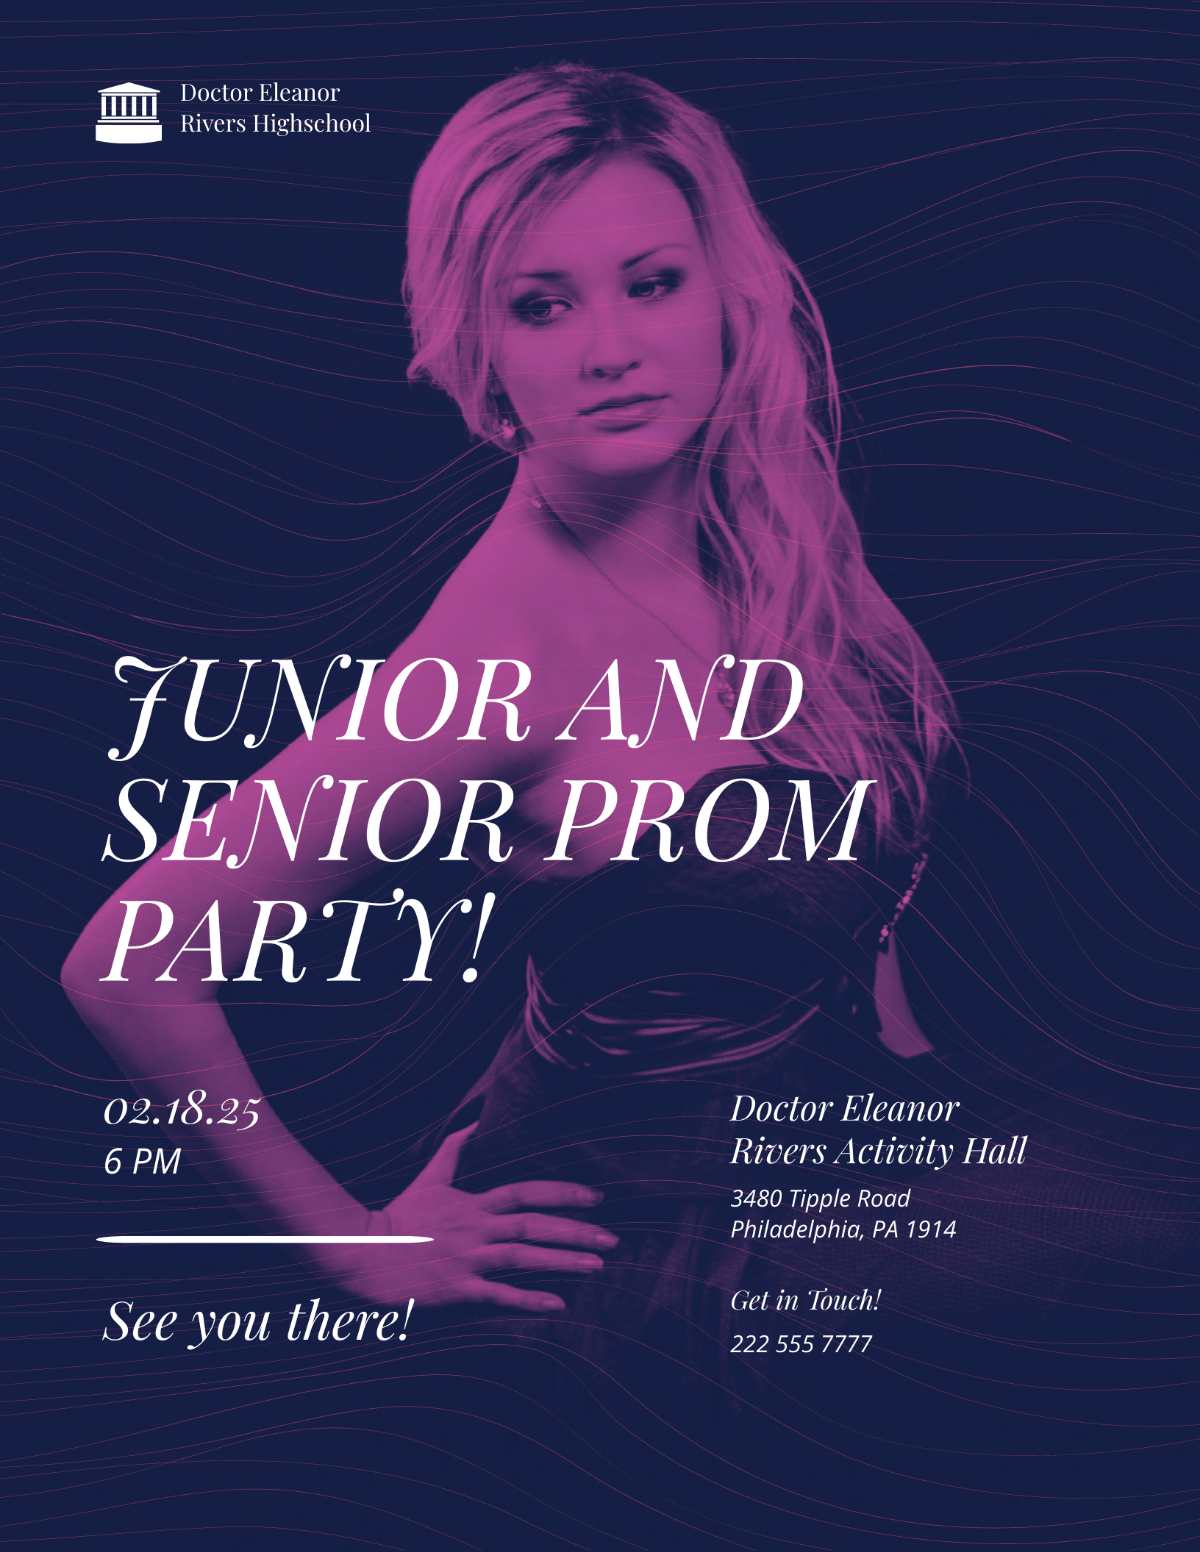 Prom Party Flyer Template - Edit Online & Download Example | Template.net